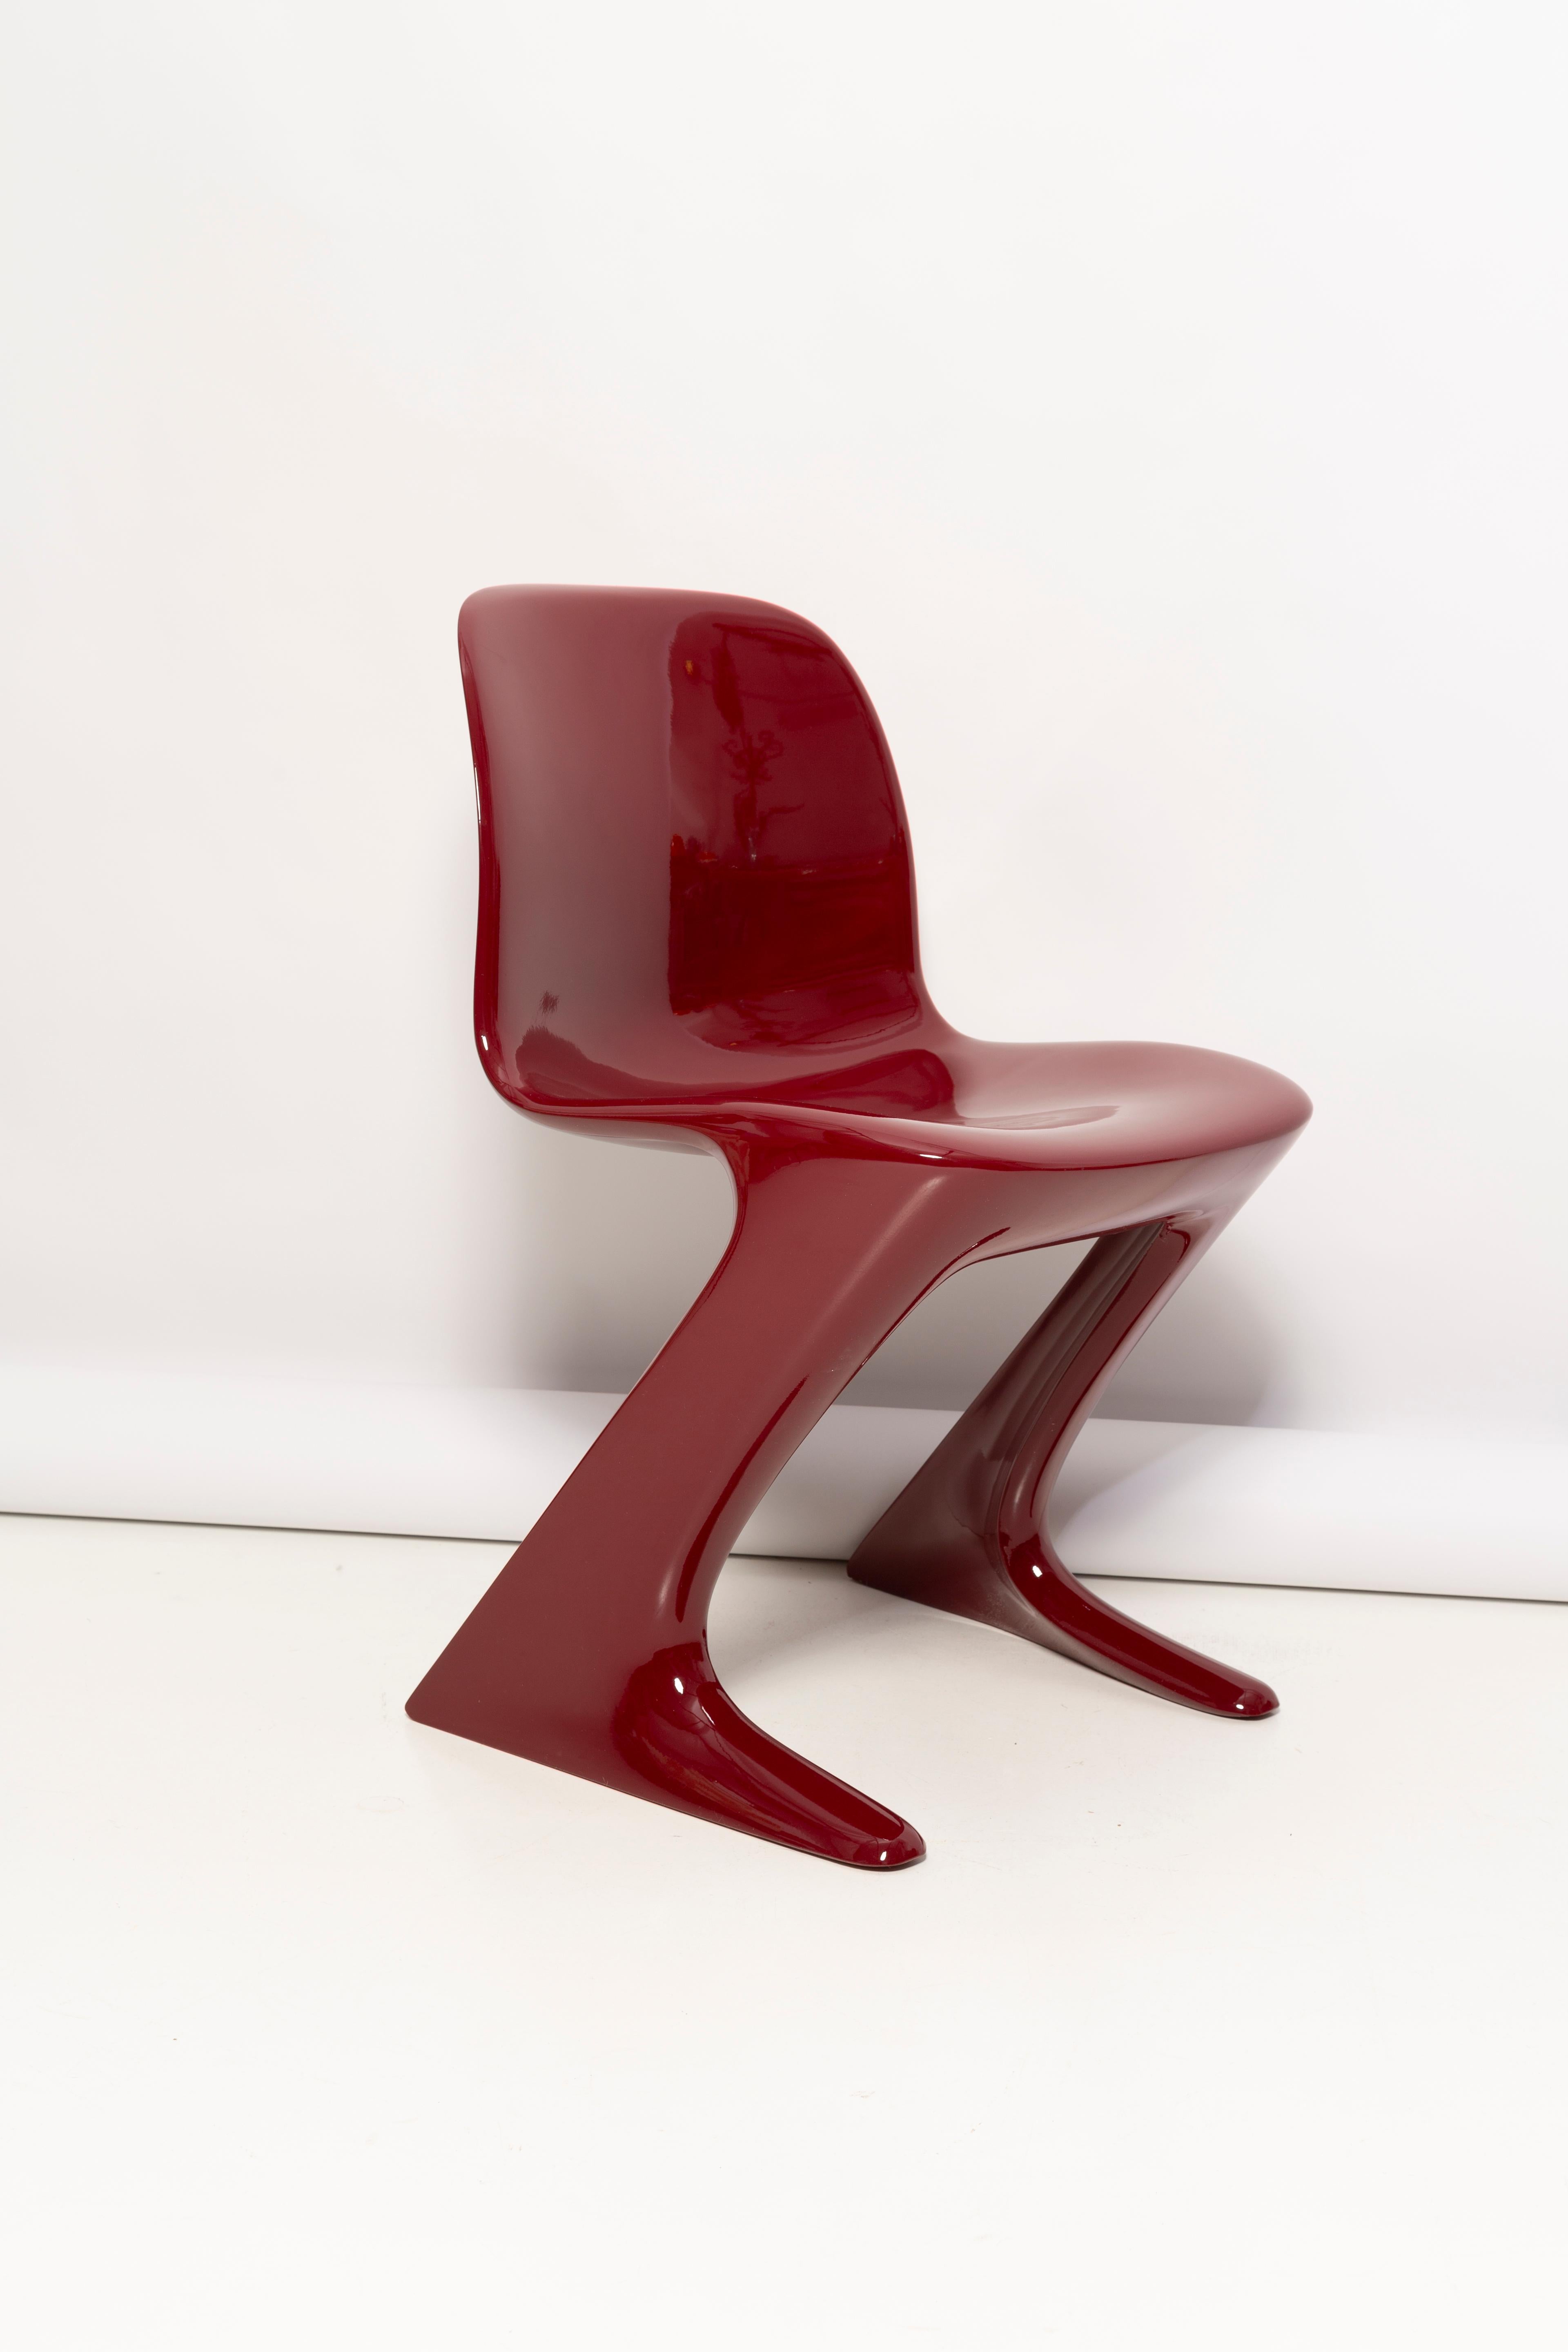 This model is called Z-chair. Designed in 1968 in the GDR by Ernst Moeckl and Siegfried Mehl, German Version of the Panton chair. Also called kangaroo chair or variopur chair. Produced in eastern Germany.

Chair is after full renovation, glossy red